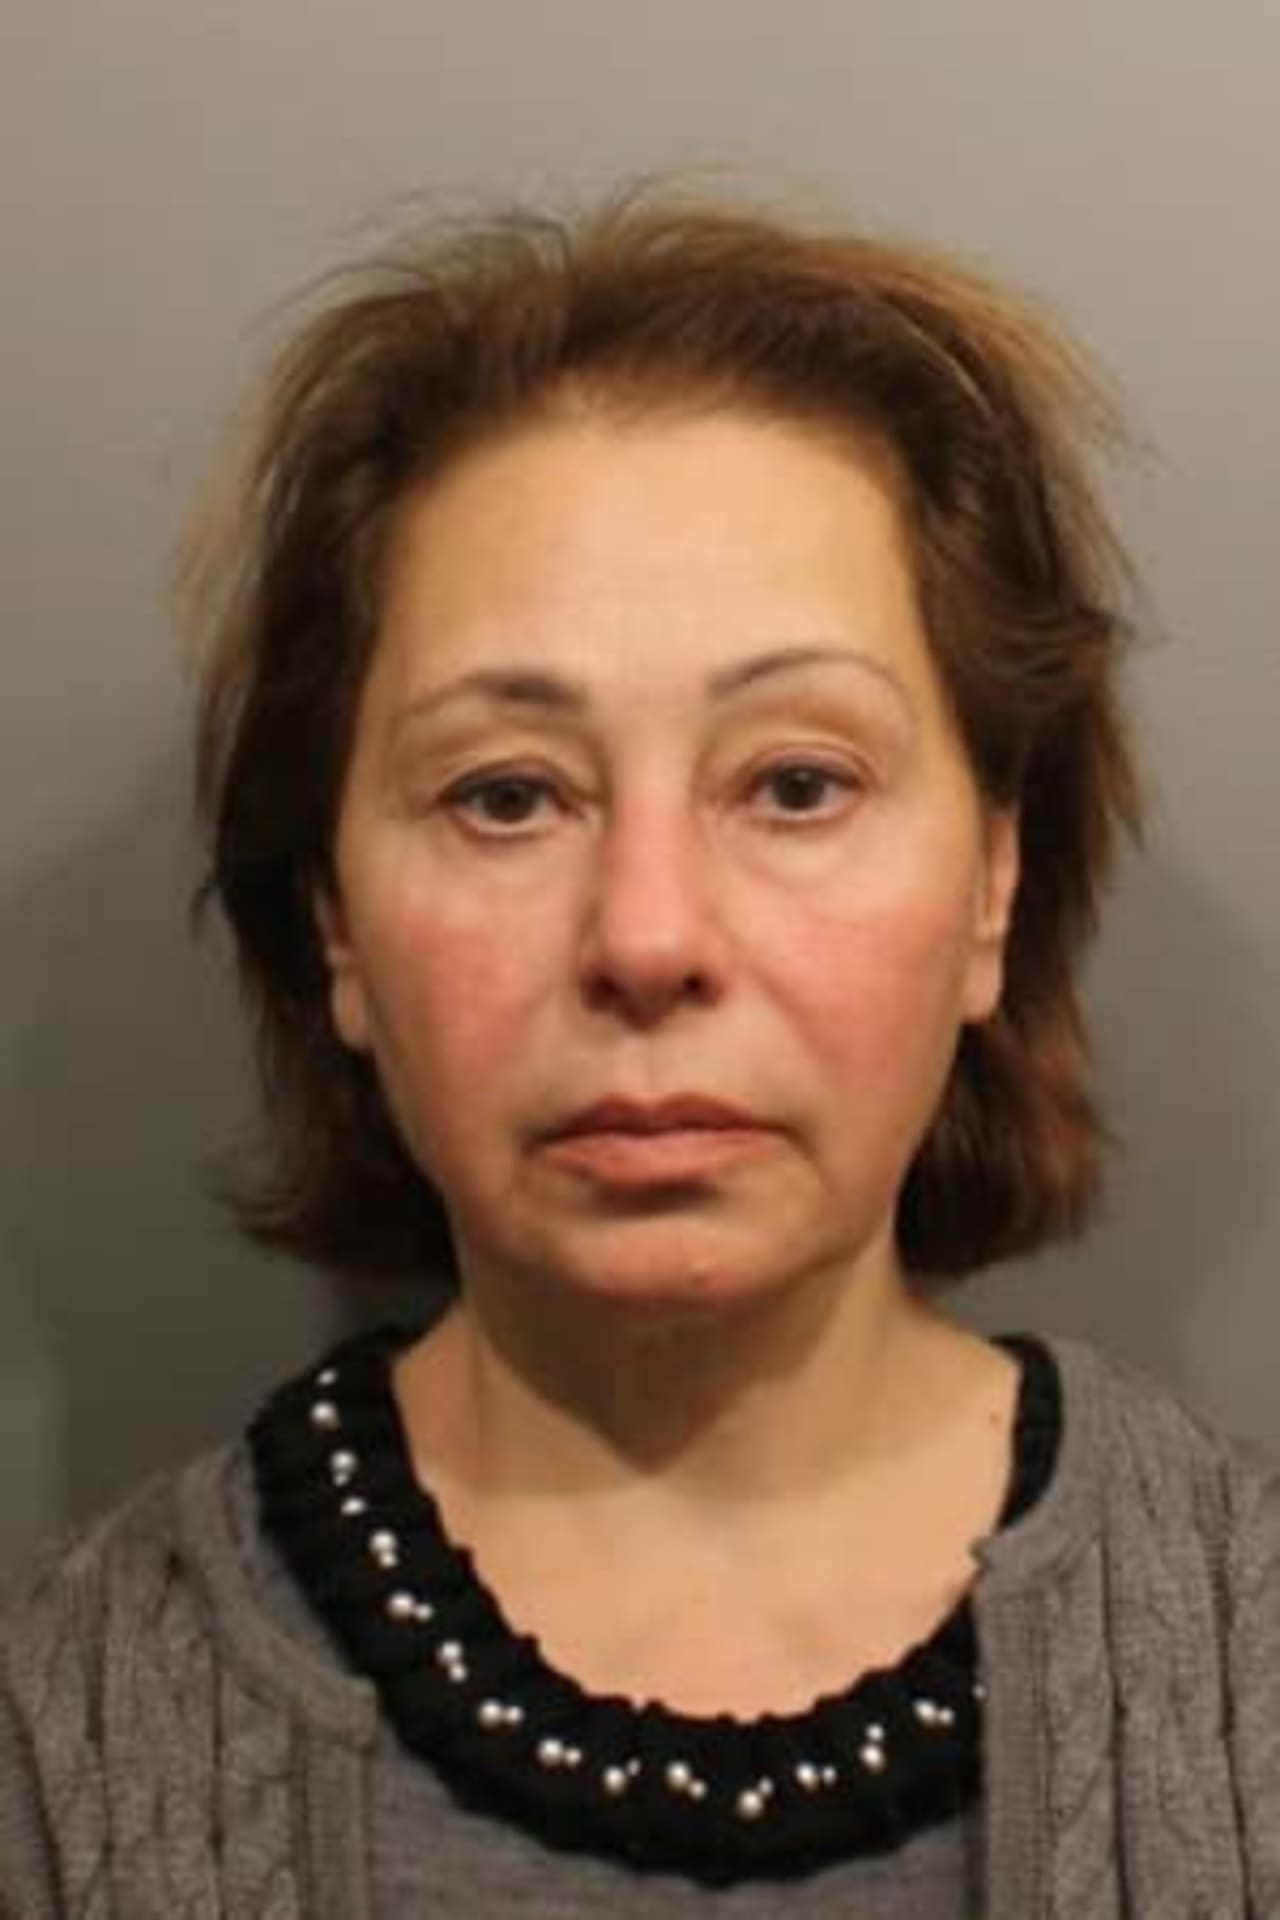 The arrest of Simi Honarbakhsh, 61, of Wilton on charges of failing to appear in court after she was involved in a traffic accident topped the news in Wilton last week.